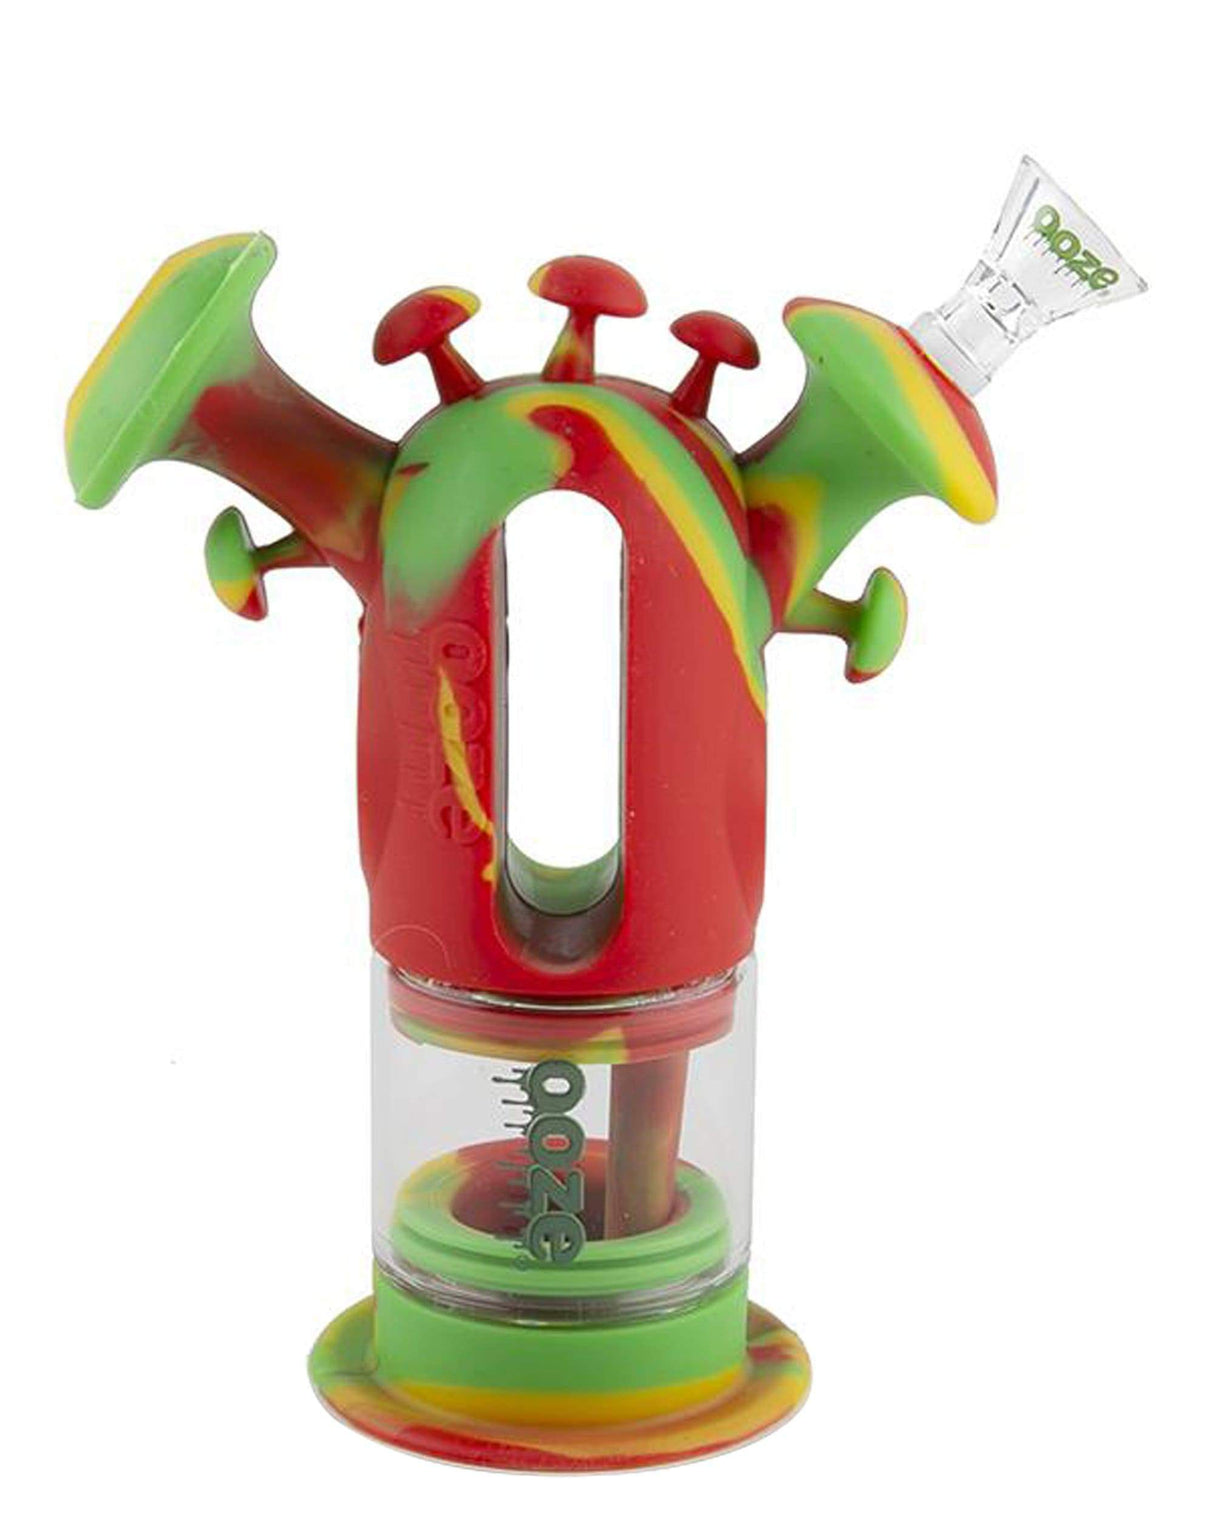 Ooze - Trip Silicone Bubbler in Rasta colors with Quartz bowl, 45-degree joint, front view on white background